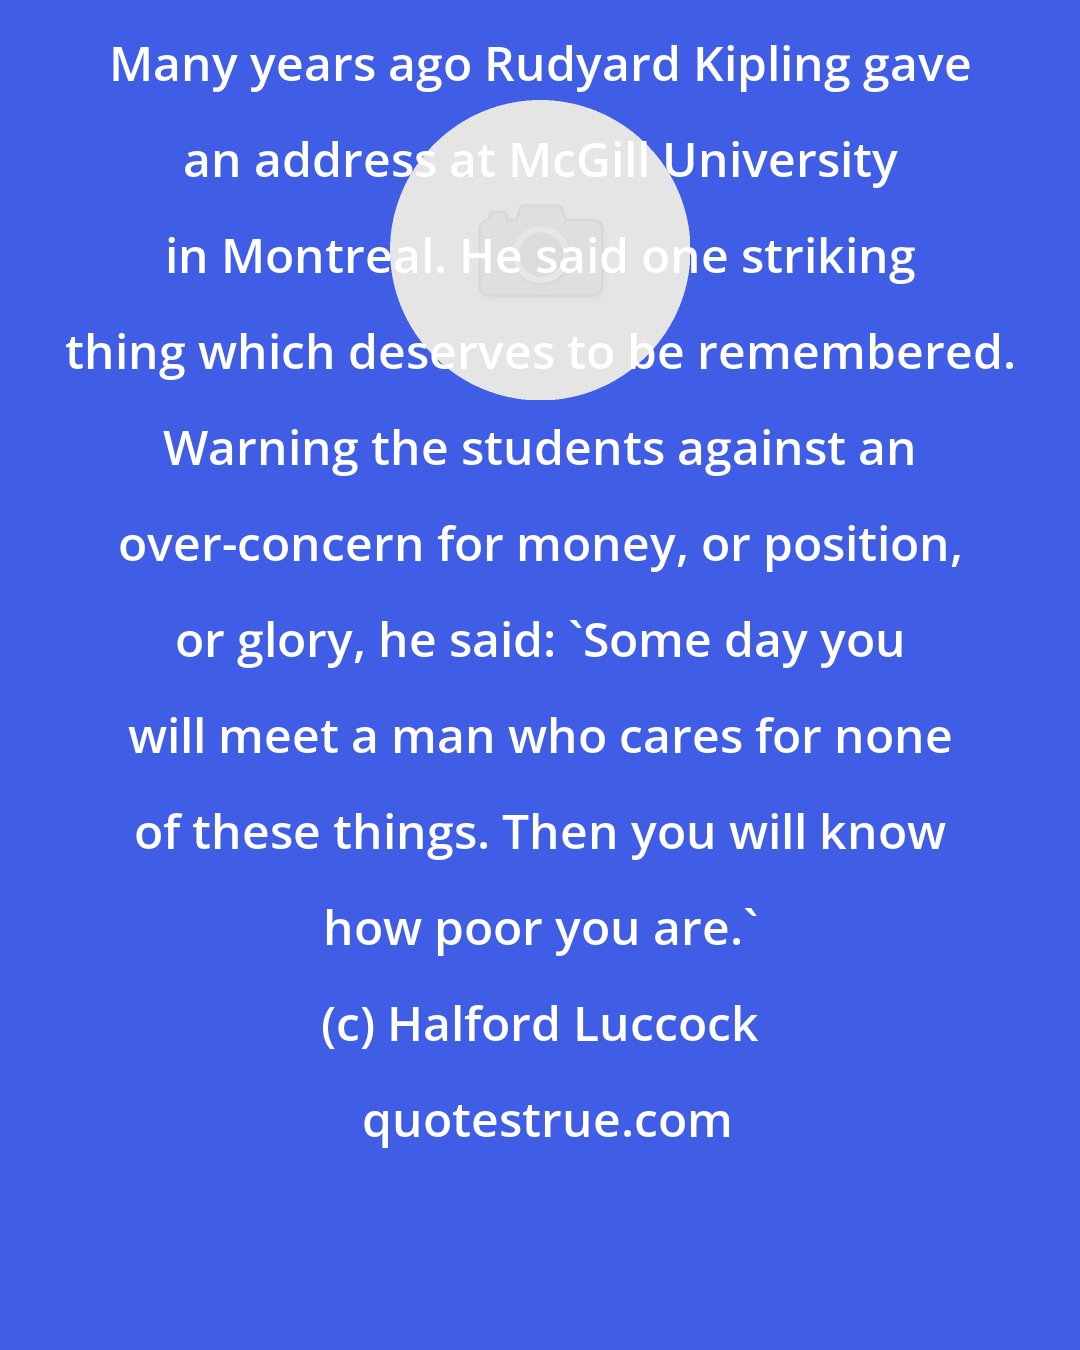 Halford Luccock: Many years ago Rudyard Kipling gave an address at McGill University in Montreal. He said one striking thing which deserves to be remembered. Warning the students against an over-concern for money, or position, or glory, he said: 'Some day you will meet a man who cares for none of these things. Then you will know how poor you are.'